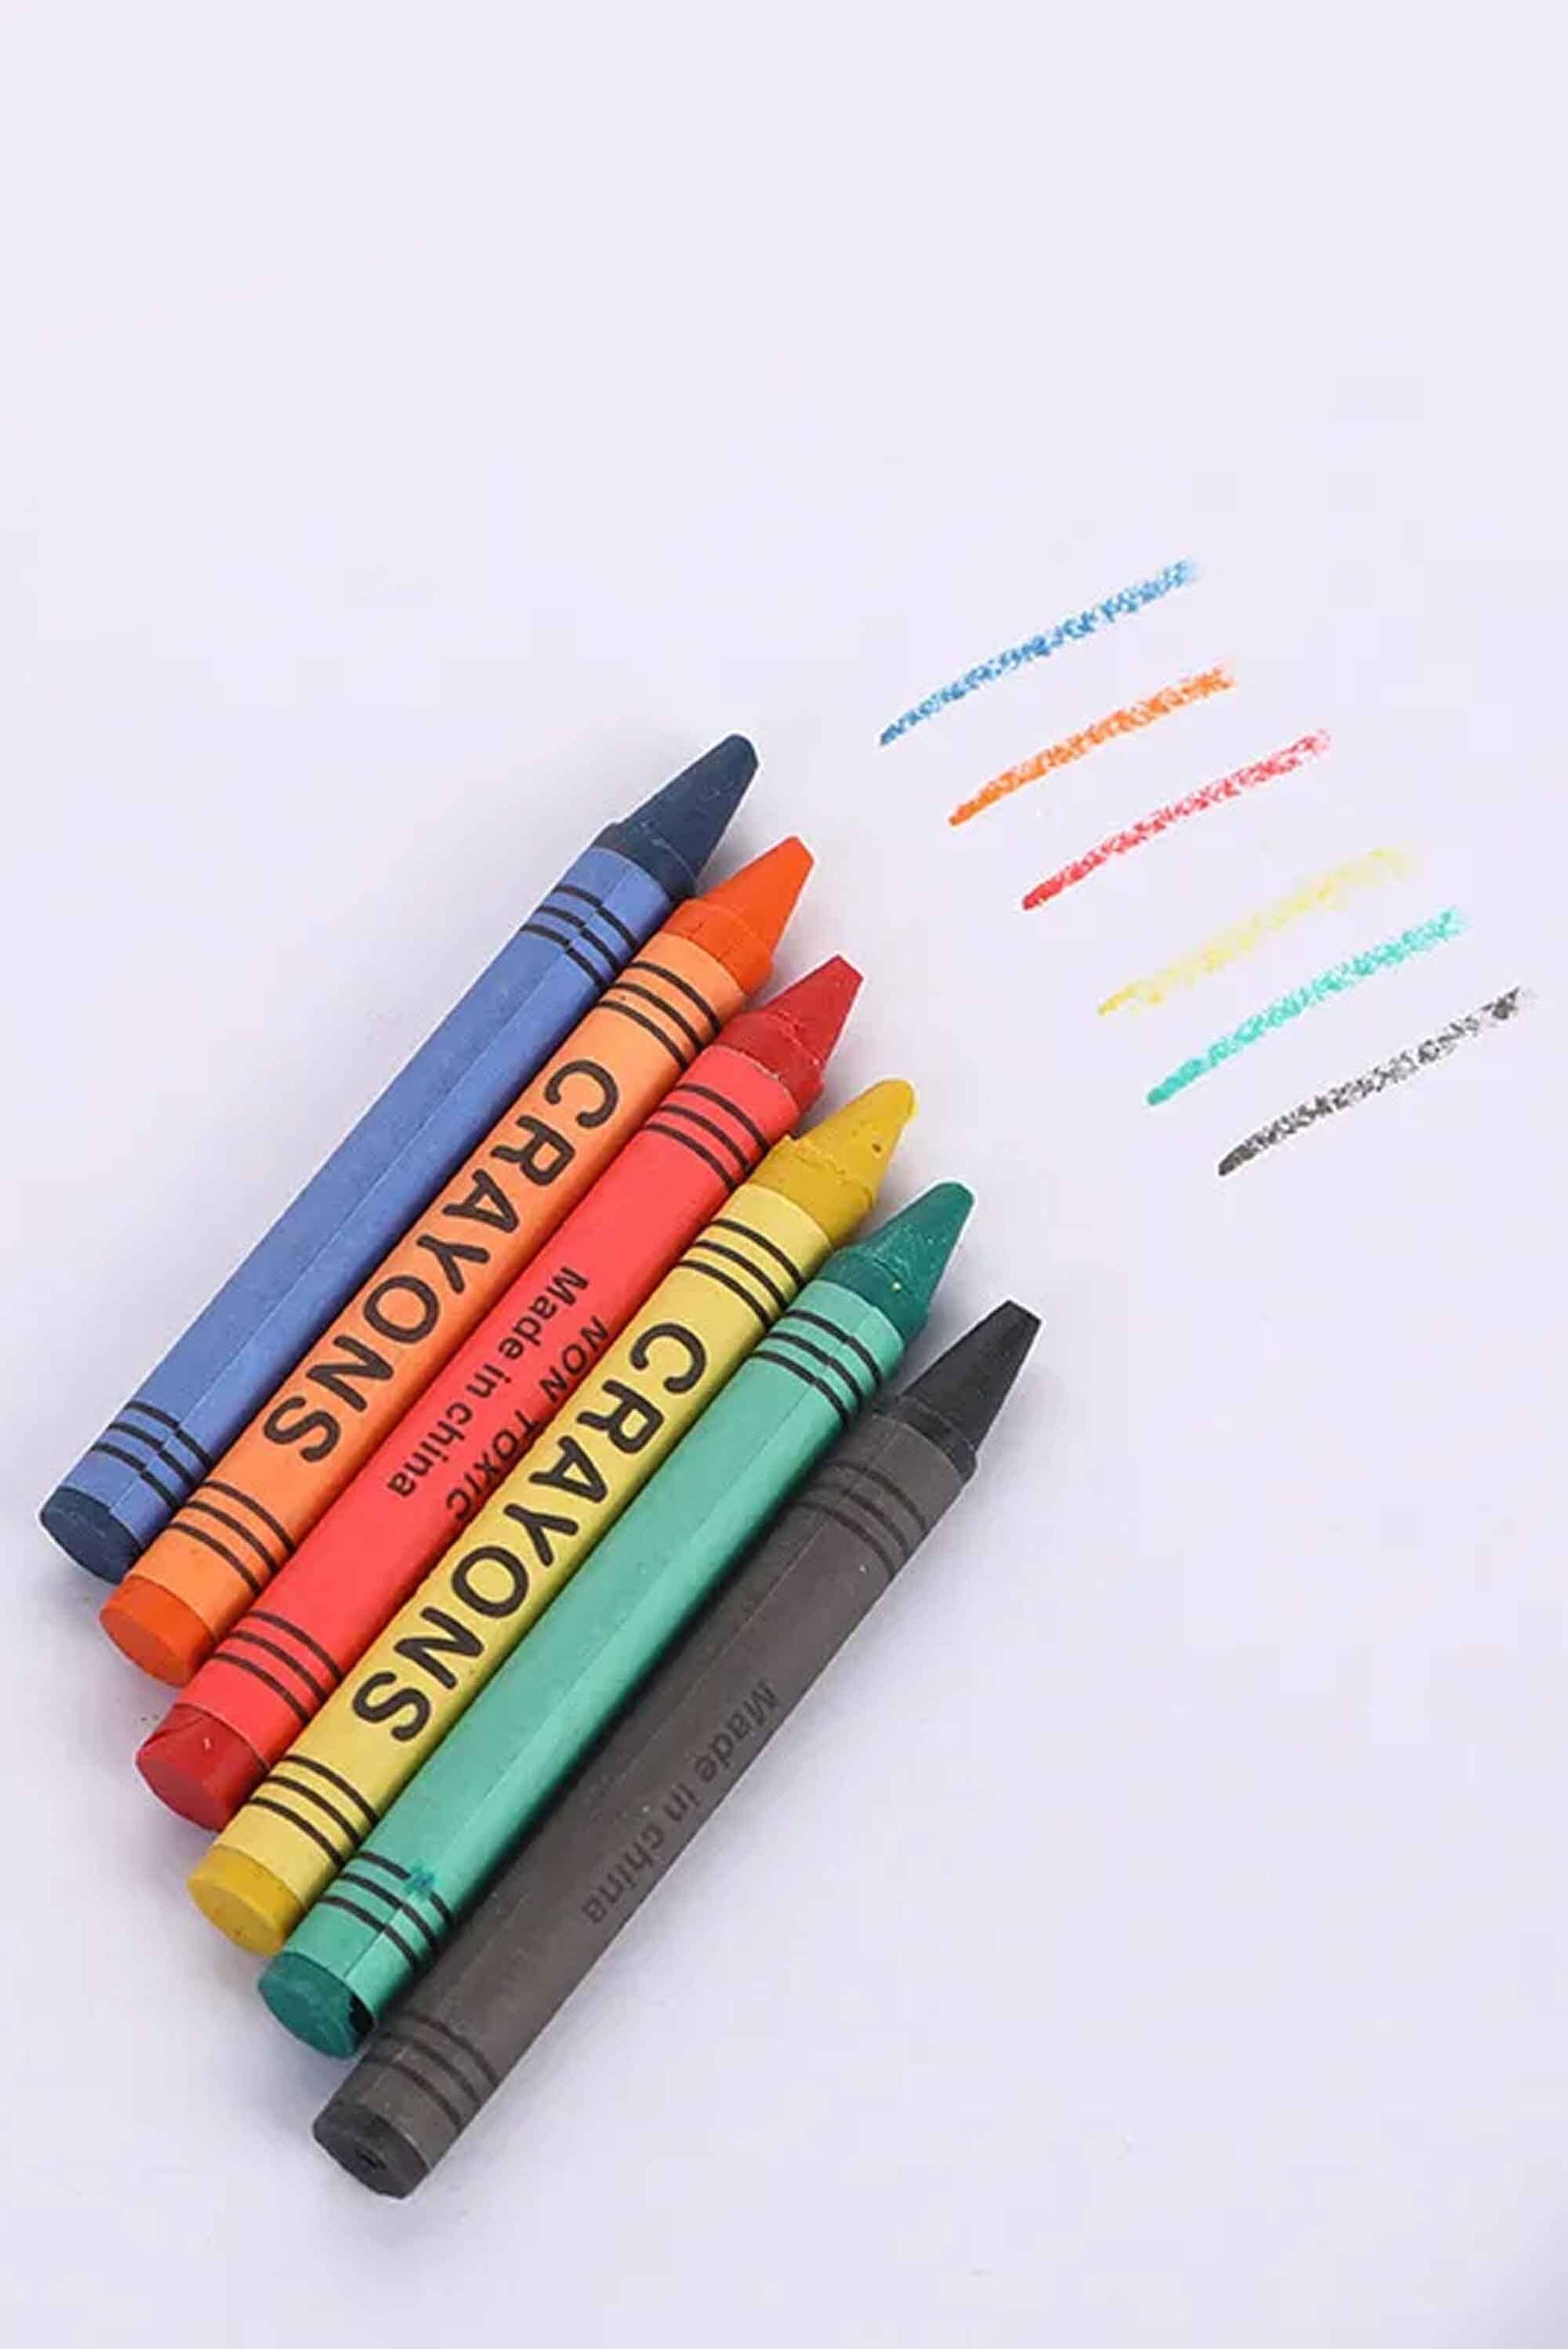 Kid's Premium Crayons Colors - Pack Of 12 Stationary & General Accessories SRL 